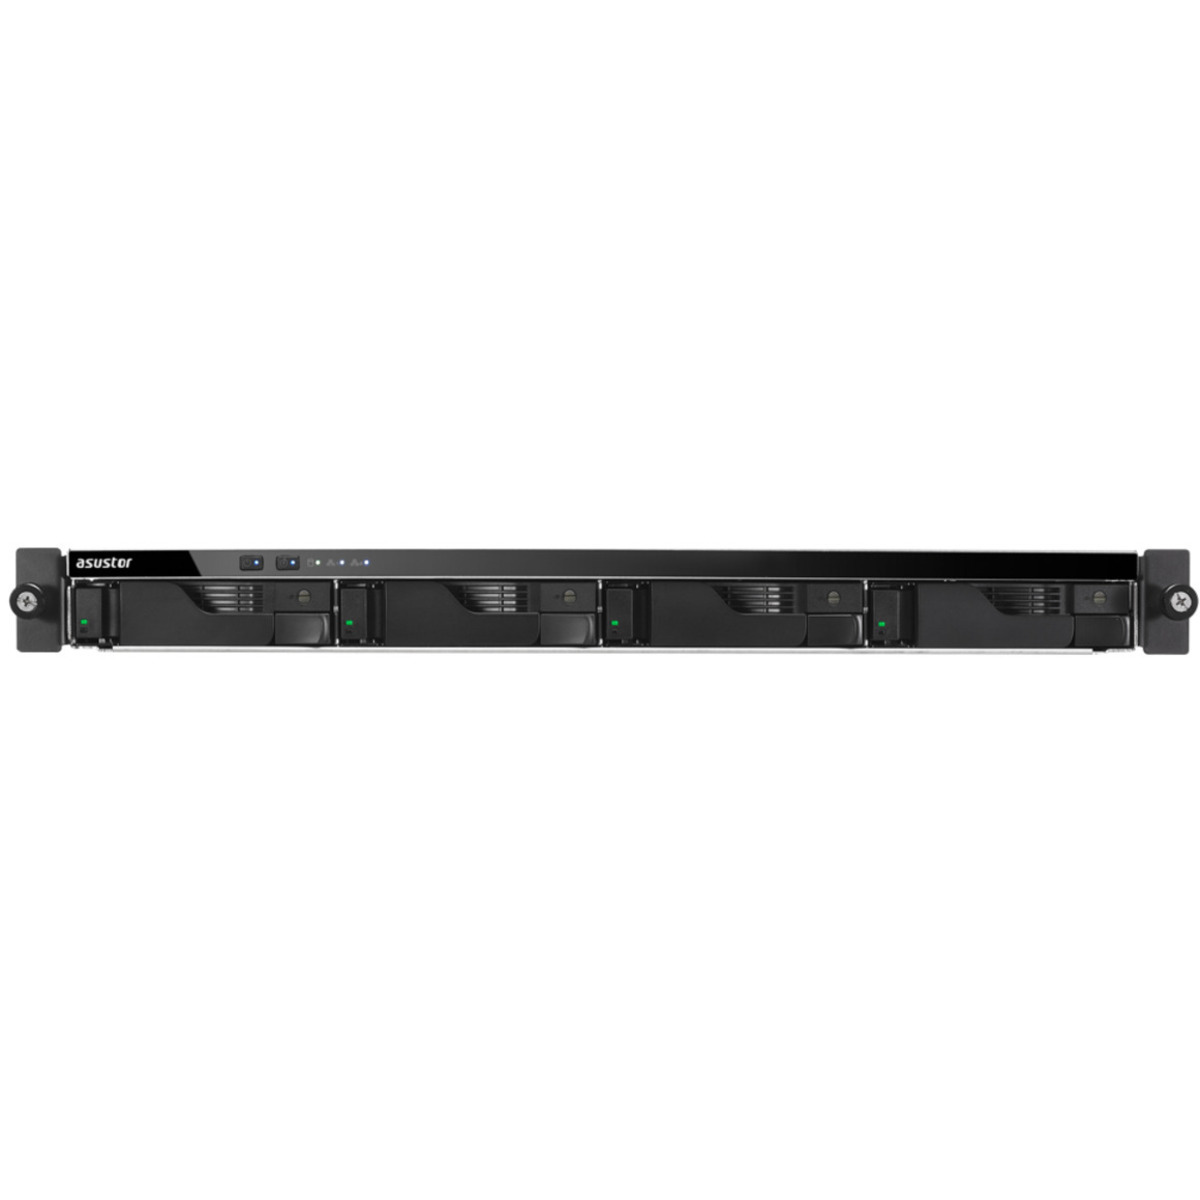 ASUSTOR LOCKERSTOR 4RS AS6504RS 18tb 4-Bay RackMount Multimedia / Power User / Business NAS - Network Attached Storage Device 3x6tb Western Digital Red Pro WD6003FFBX 3.5 7200rpm SATA 6Gb/s HDD NAS Class Drives Installed - Burn-In Tested - FREE RAM UPGRADE LOCKERSTOR 4RS AS6504RS